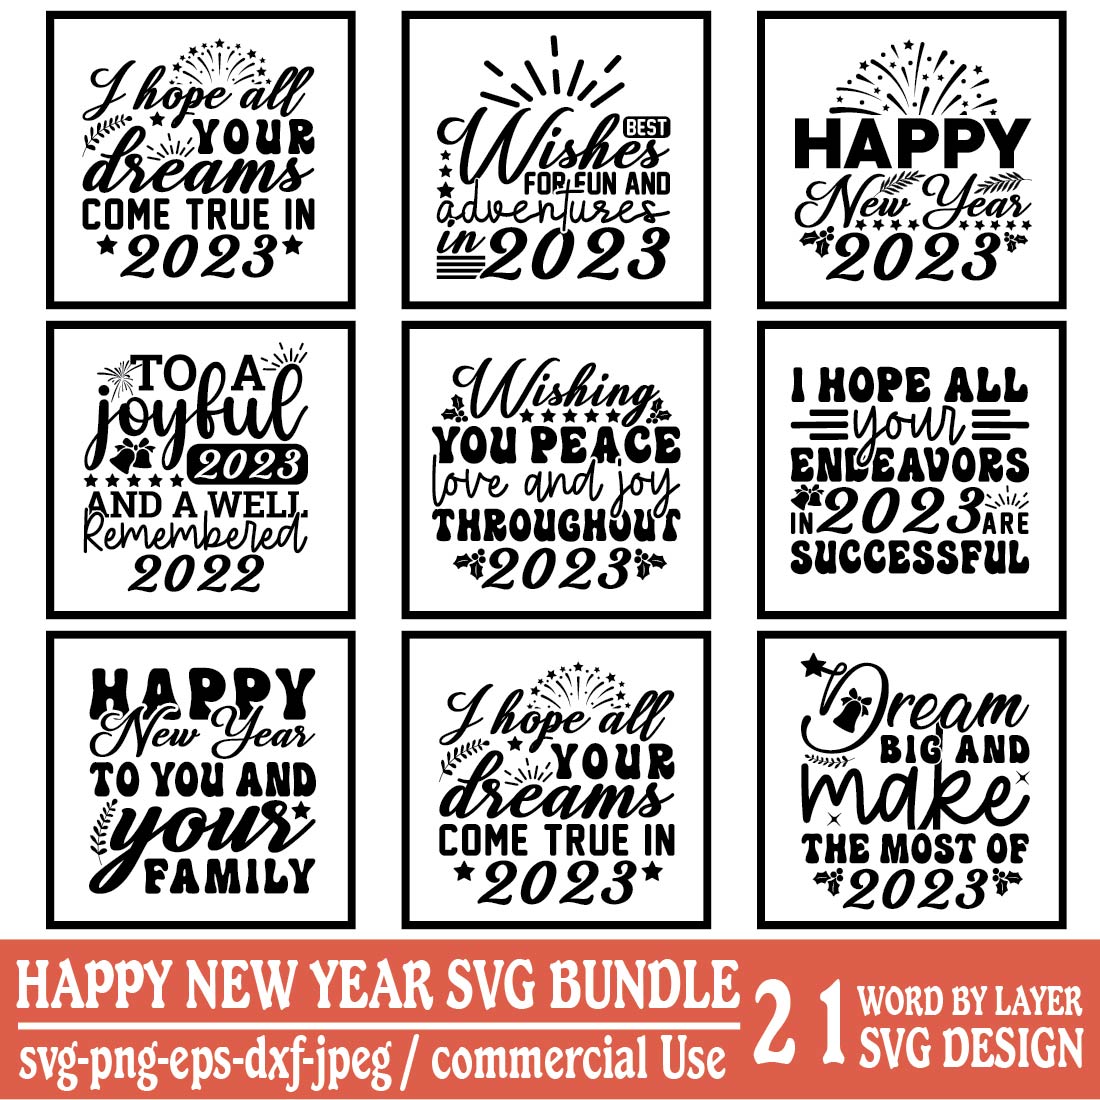 Happy New Year Svg Bundle main cover.